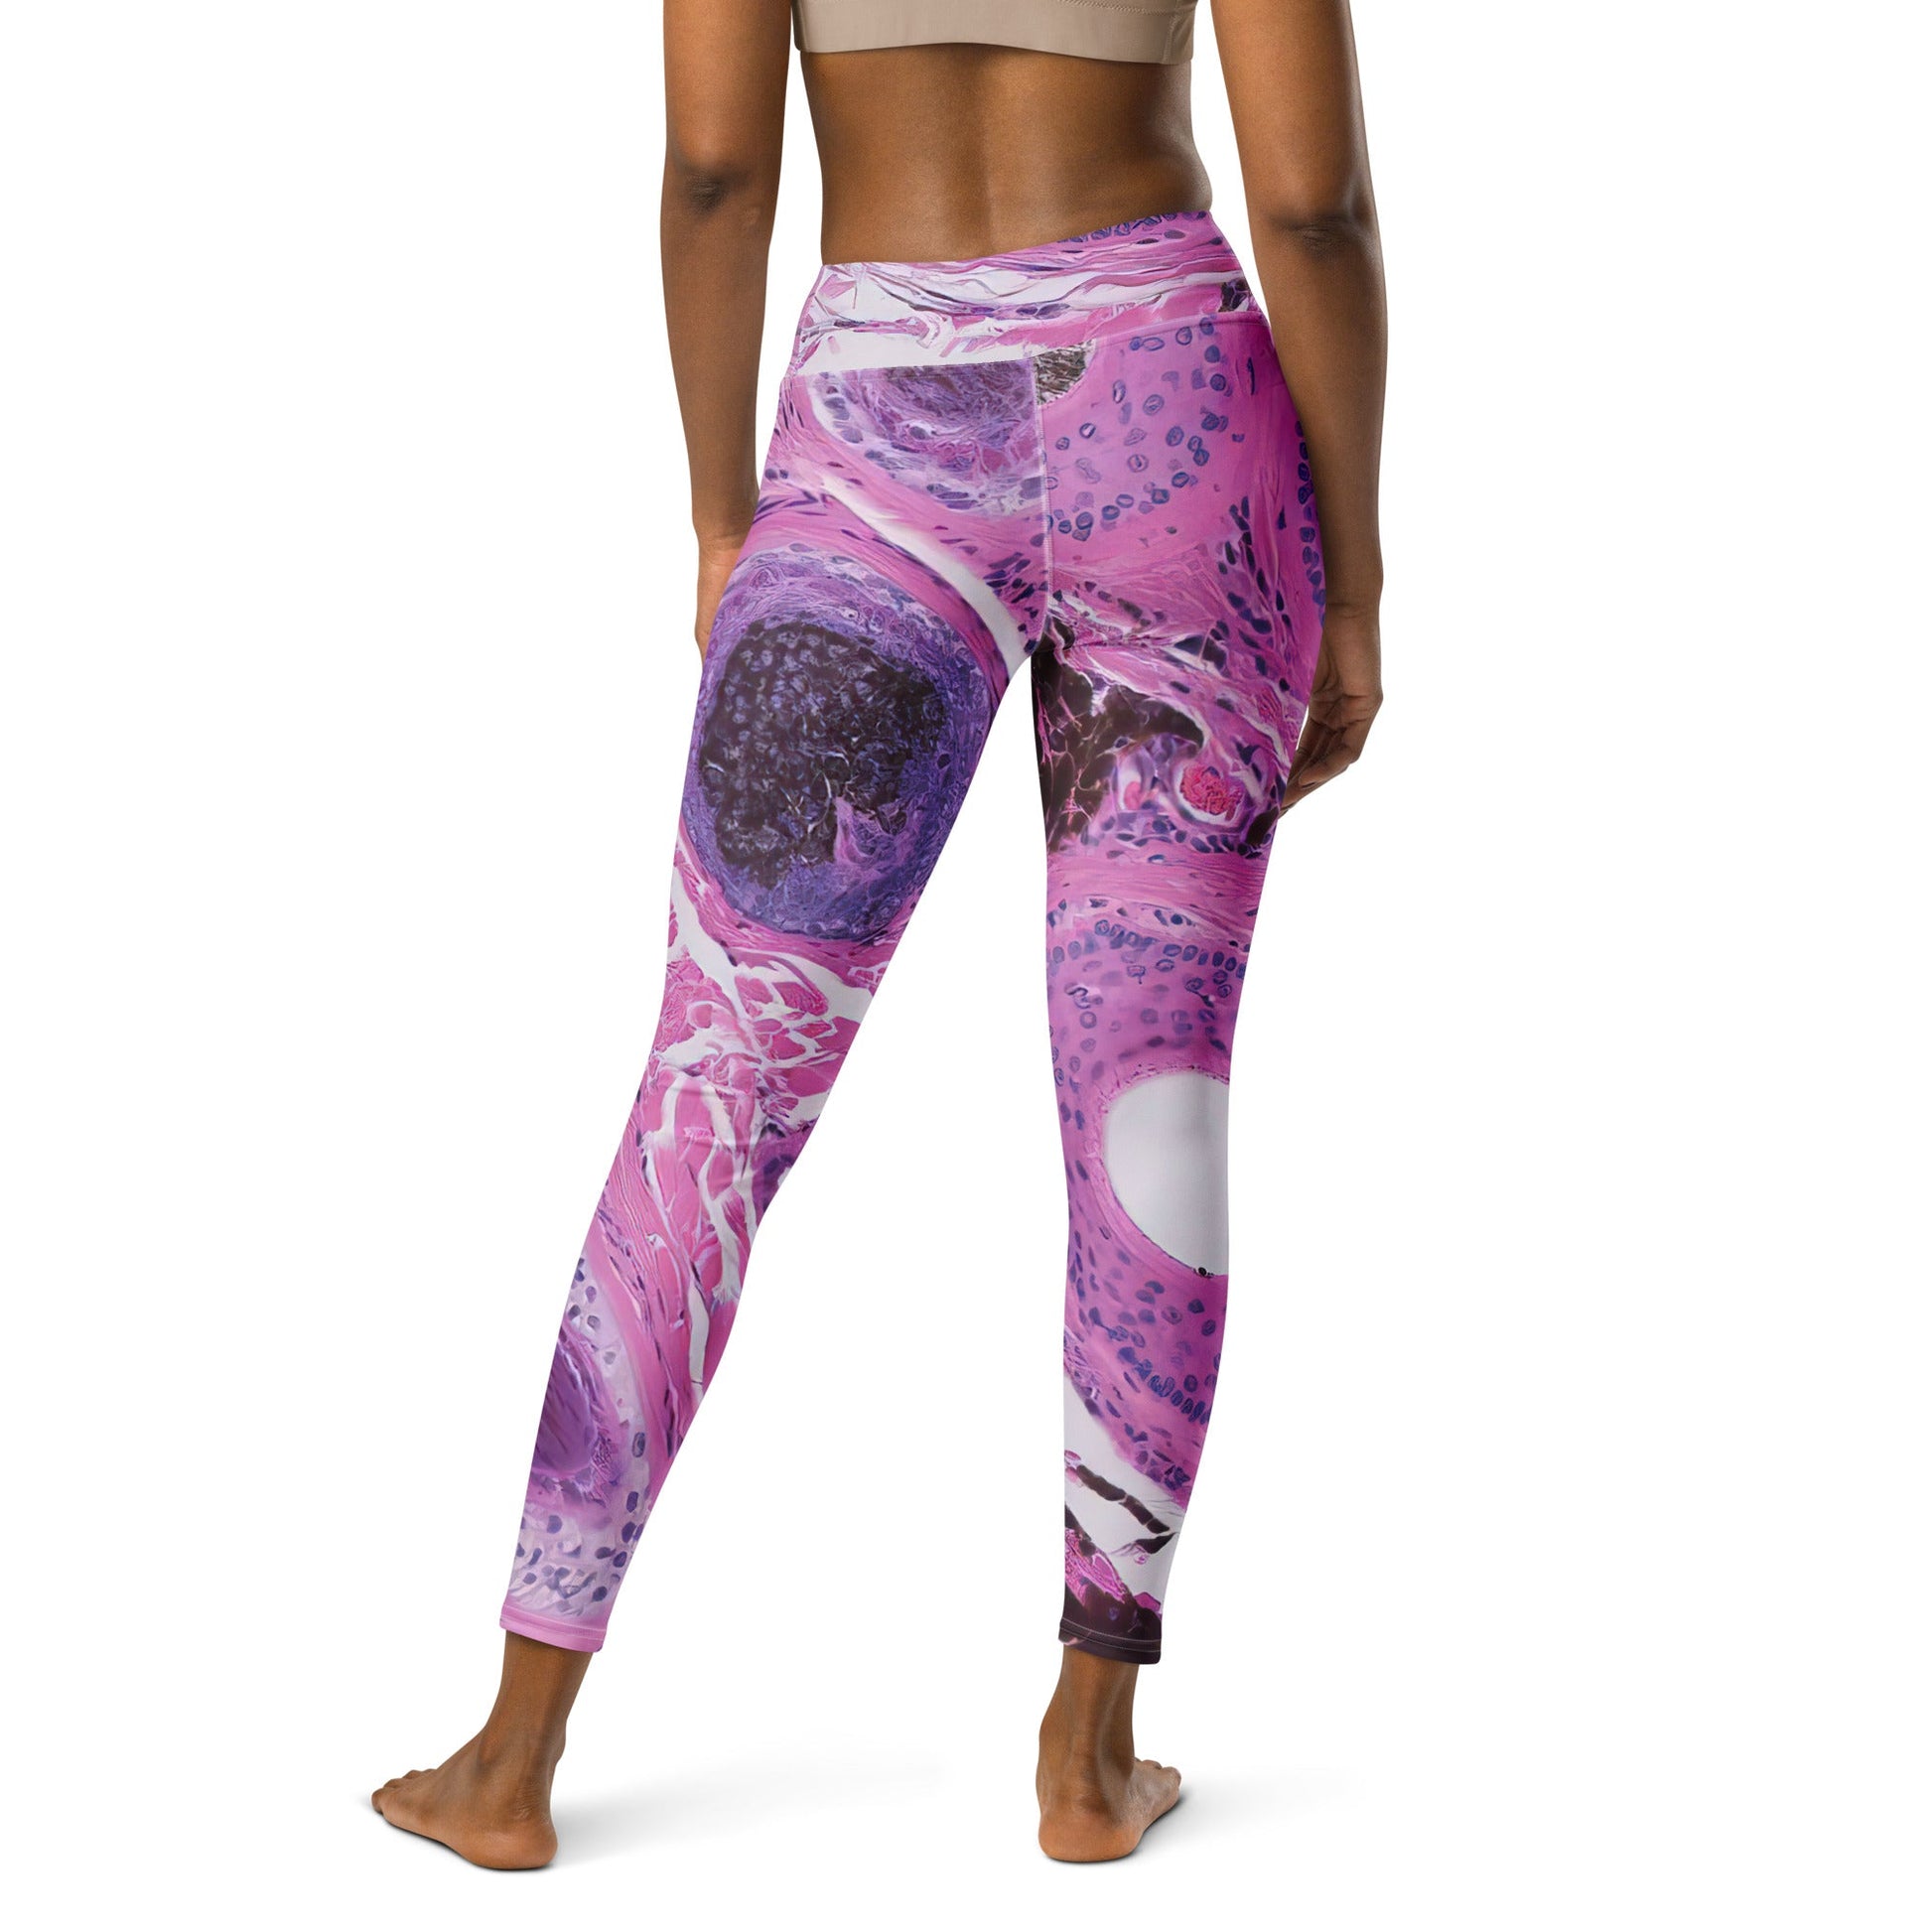 Yoga Pants - "Pink Peril" - Stage 1 Breast Cancer Awareness Yoga Pants - "Pink Peril" - Stage 1 Breast Cancer Awareness